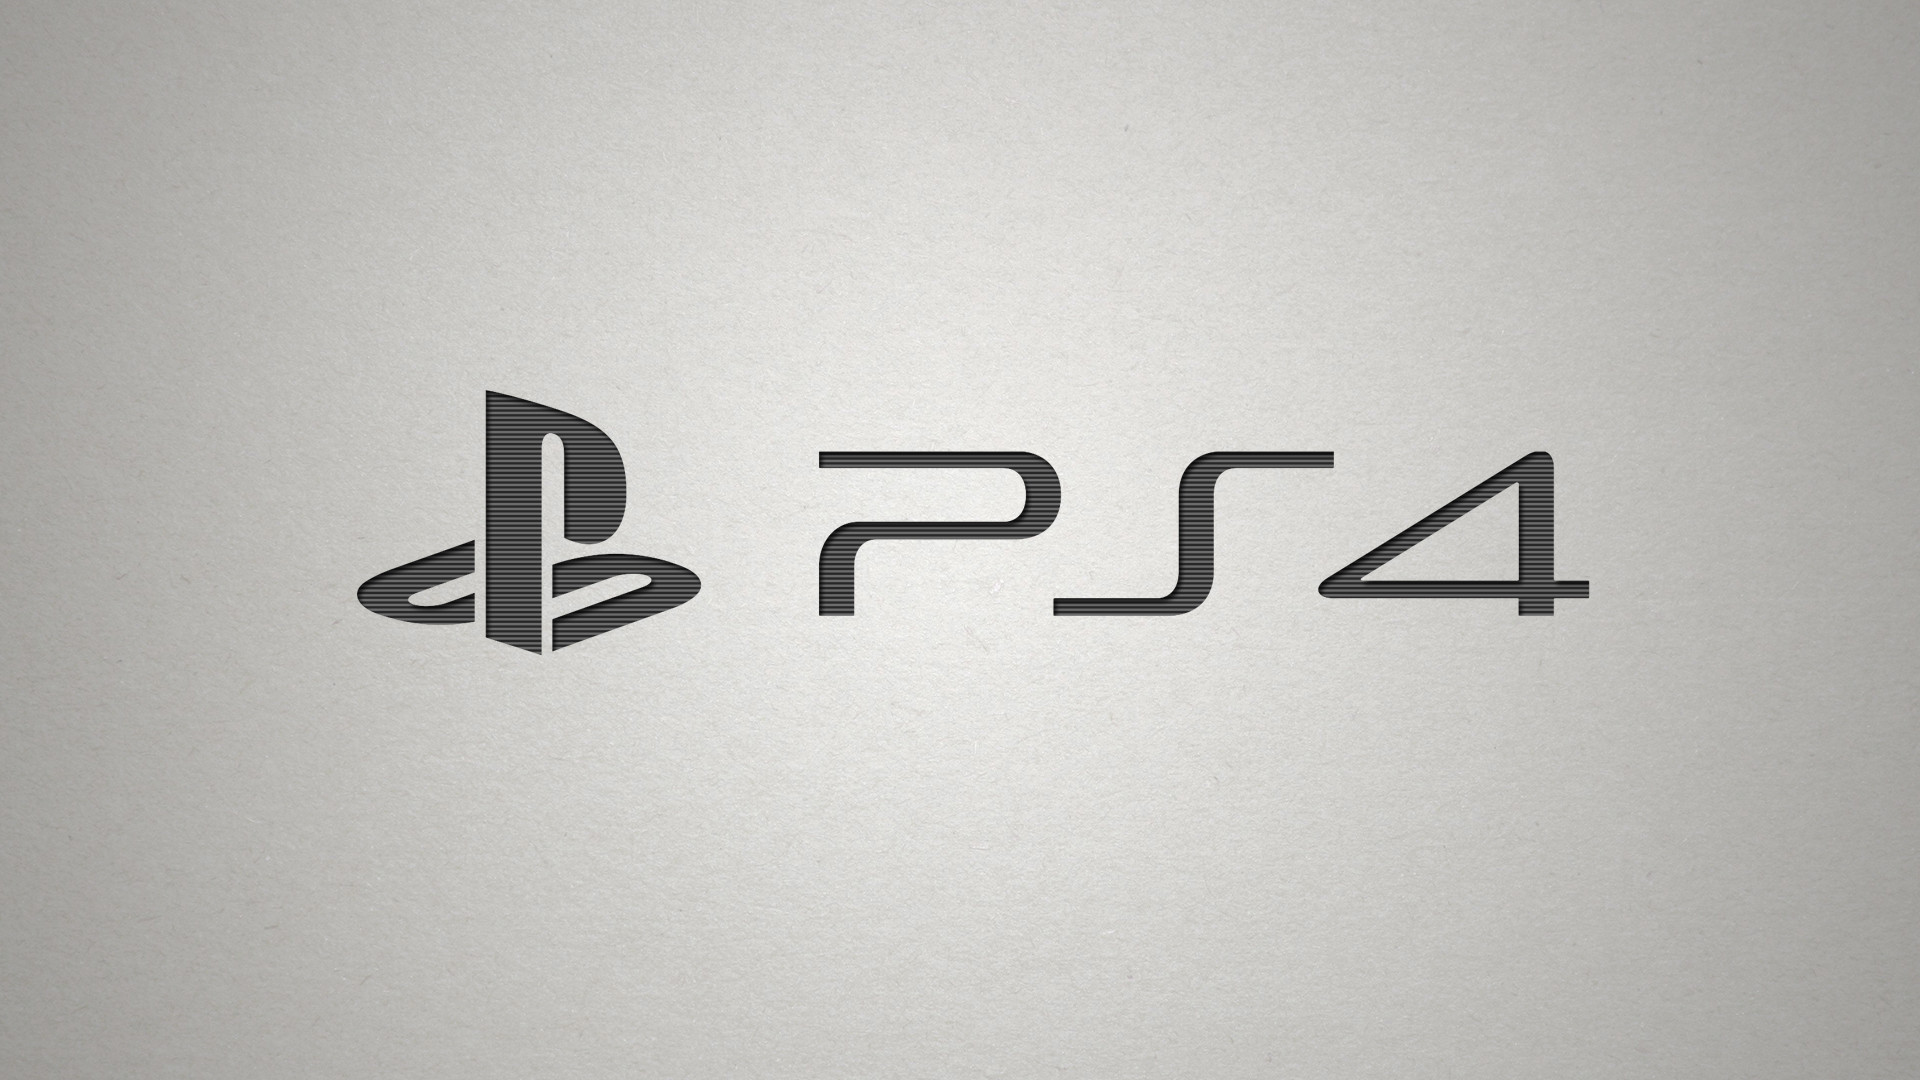 1920x1080 Video Game - Playstation 4 Wallpaper